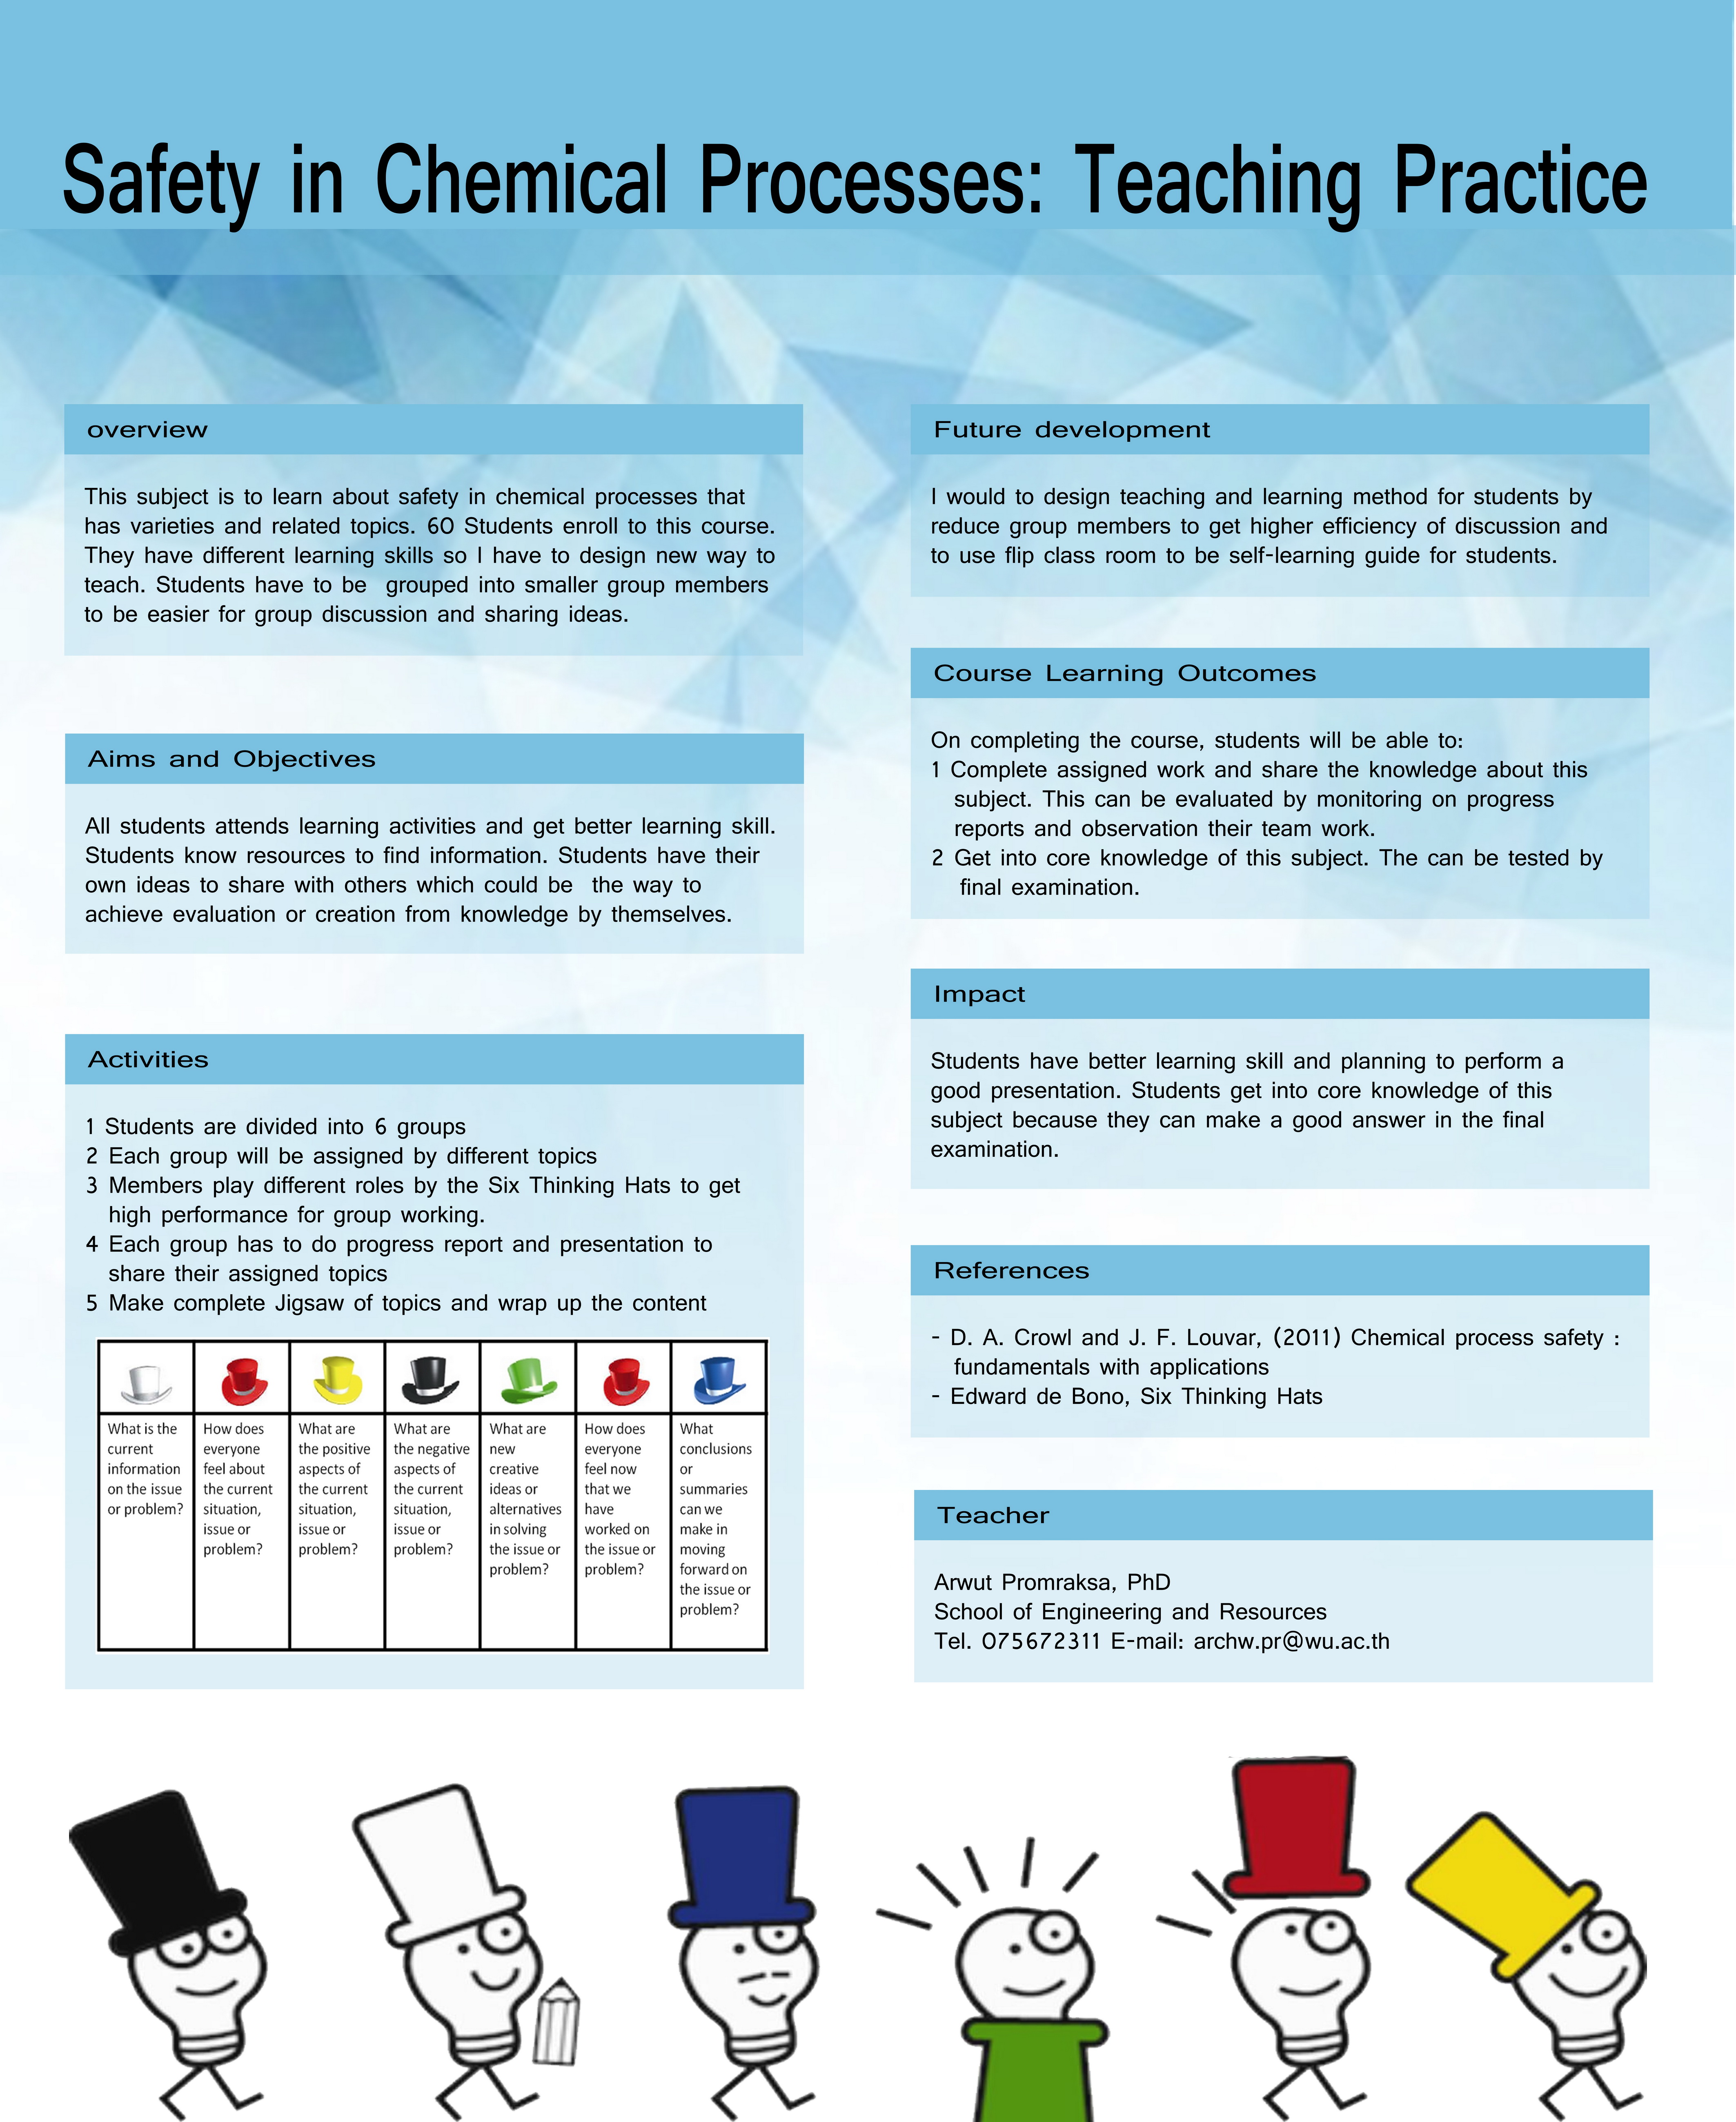 Safety in Chemical Processes: Teaching Practice